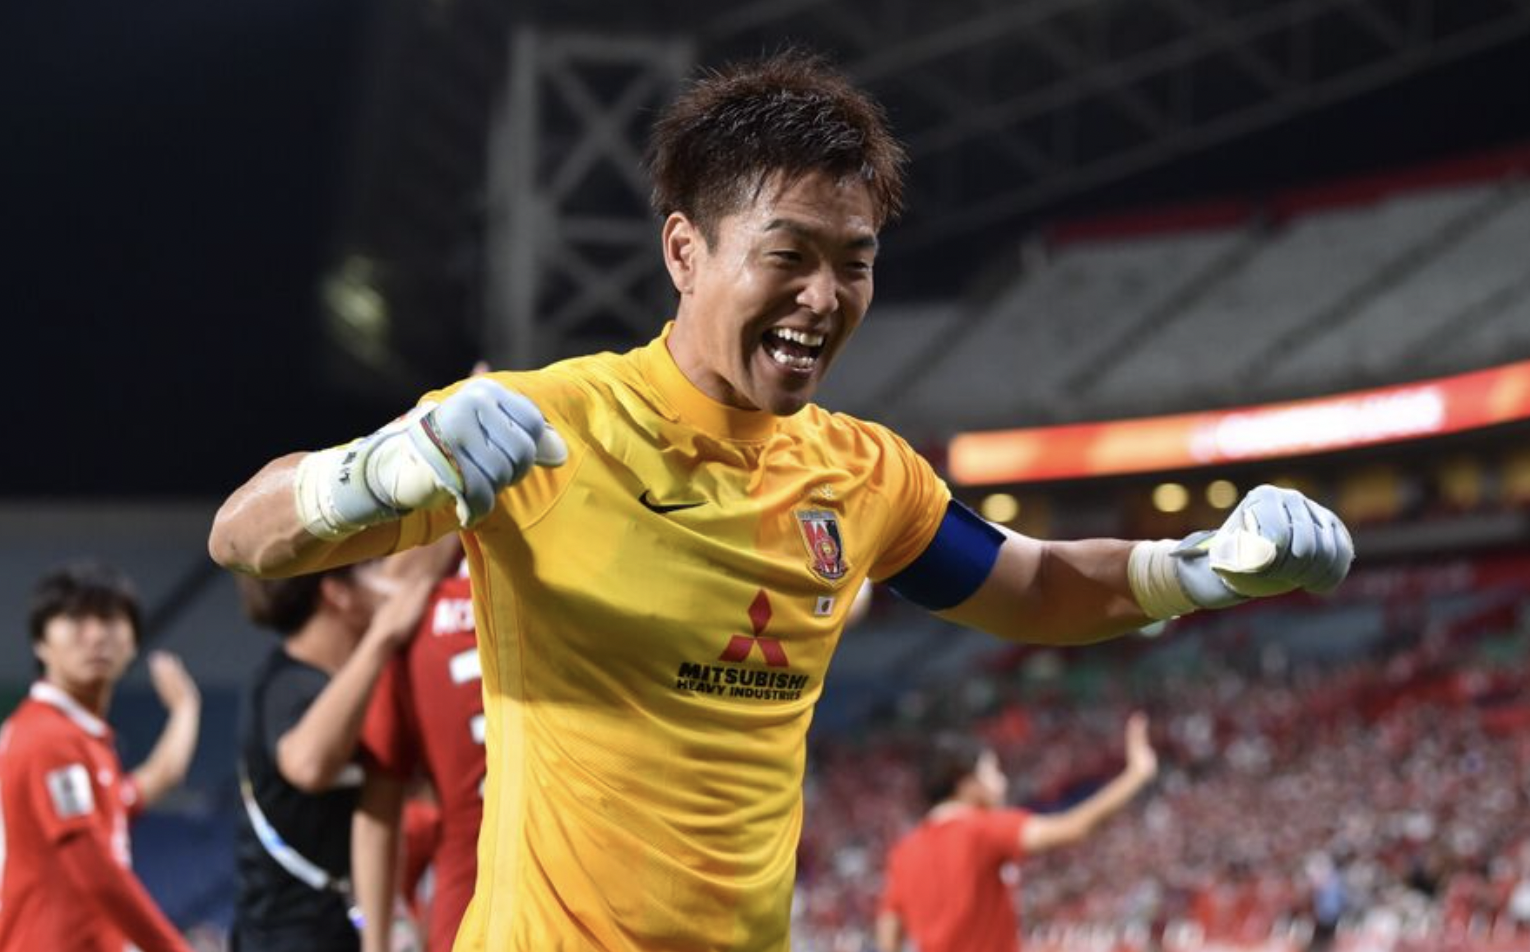 Urawa beat Jeonbuk on penalties to take the AFC Champions League final spot in the East Zone